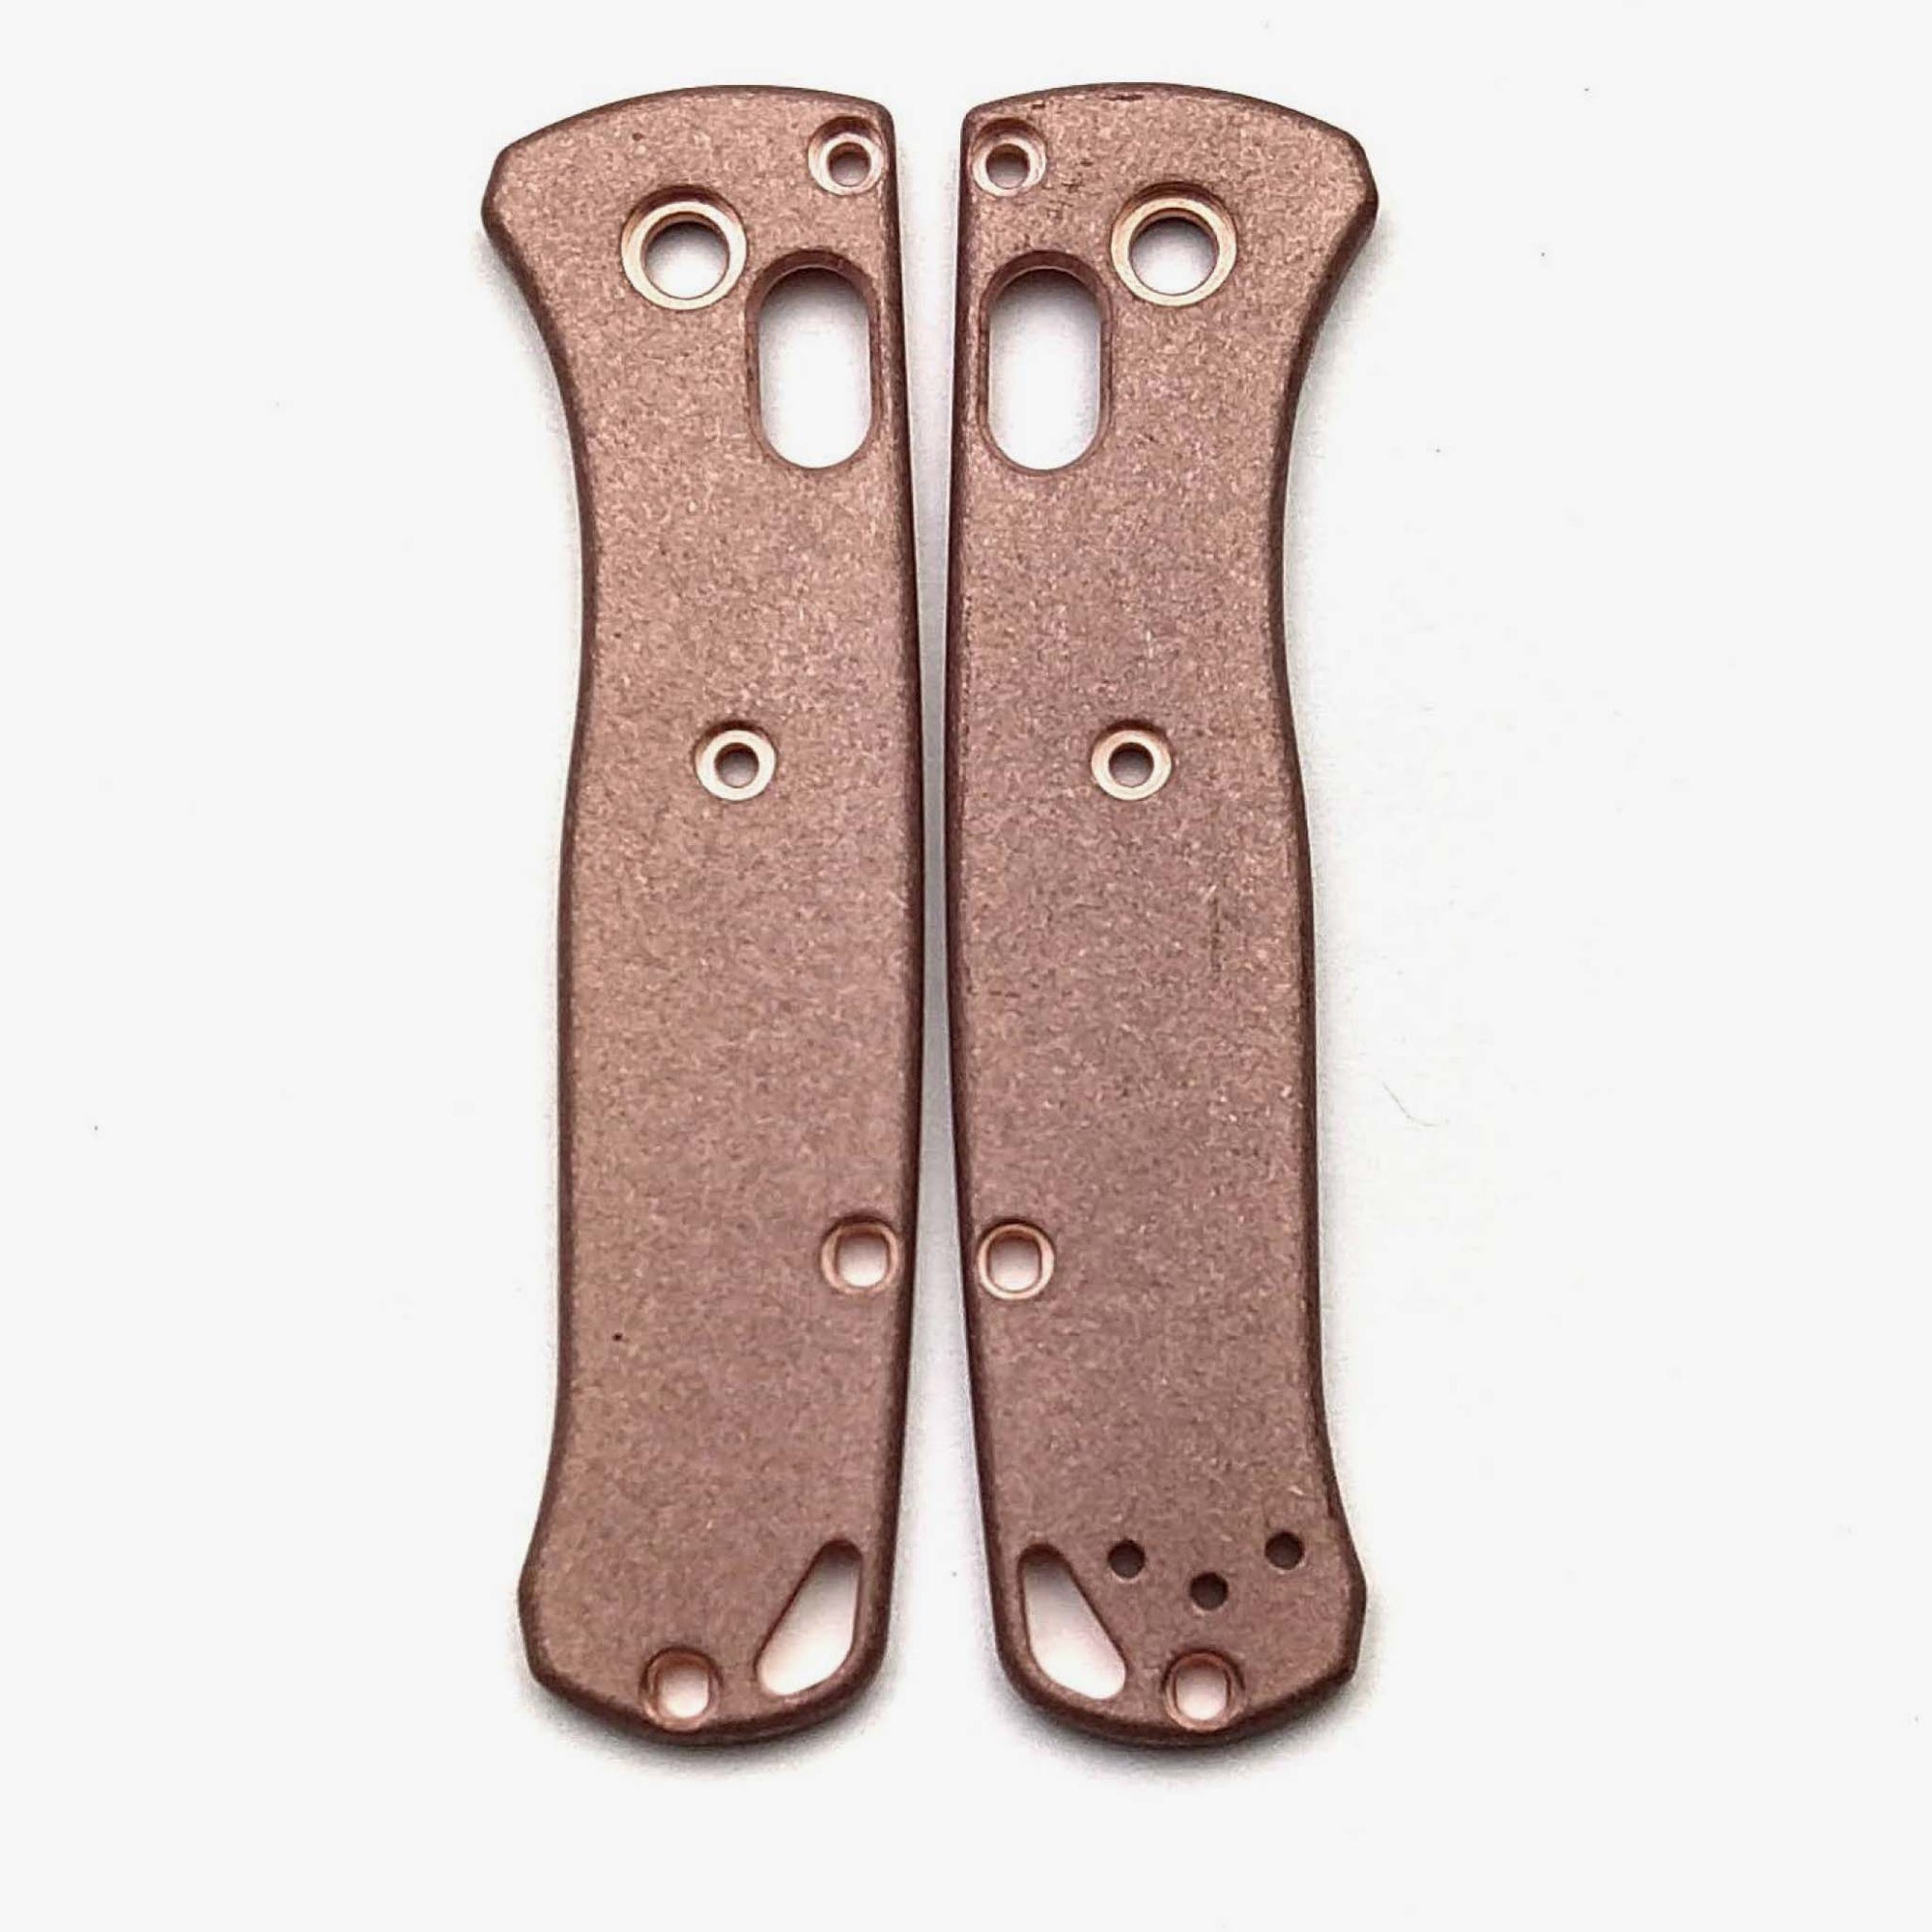 Classic Copper Scales for Benchmade MINI Bugout Knife-Copper Stonewash